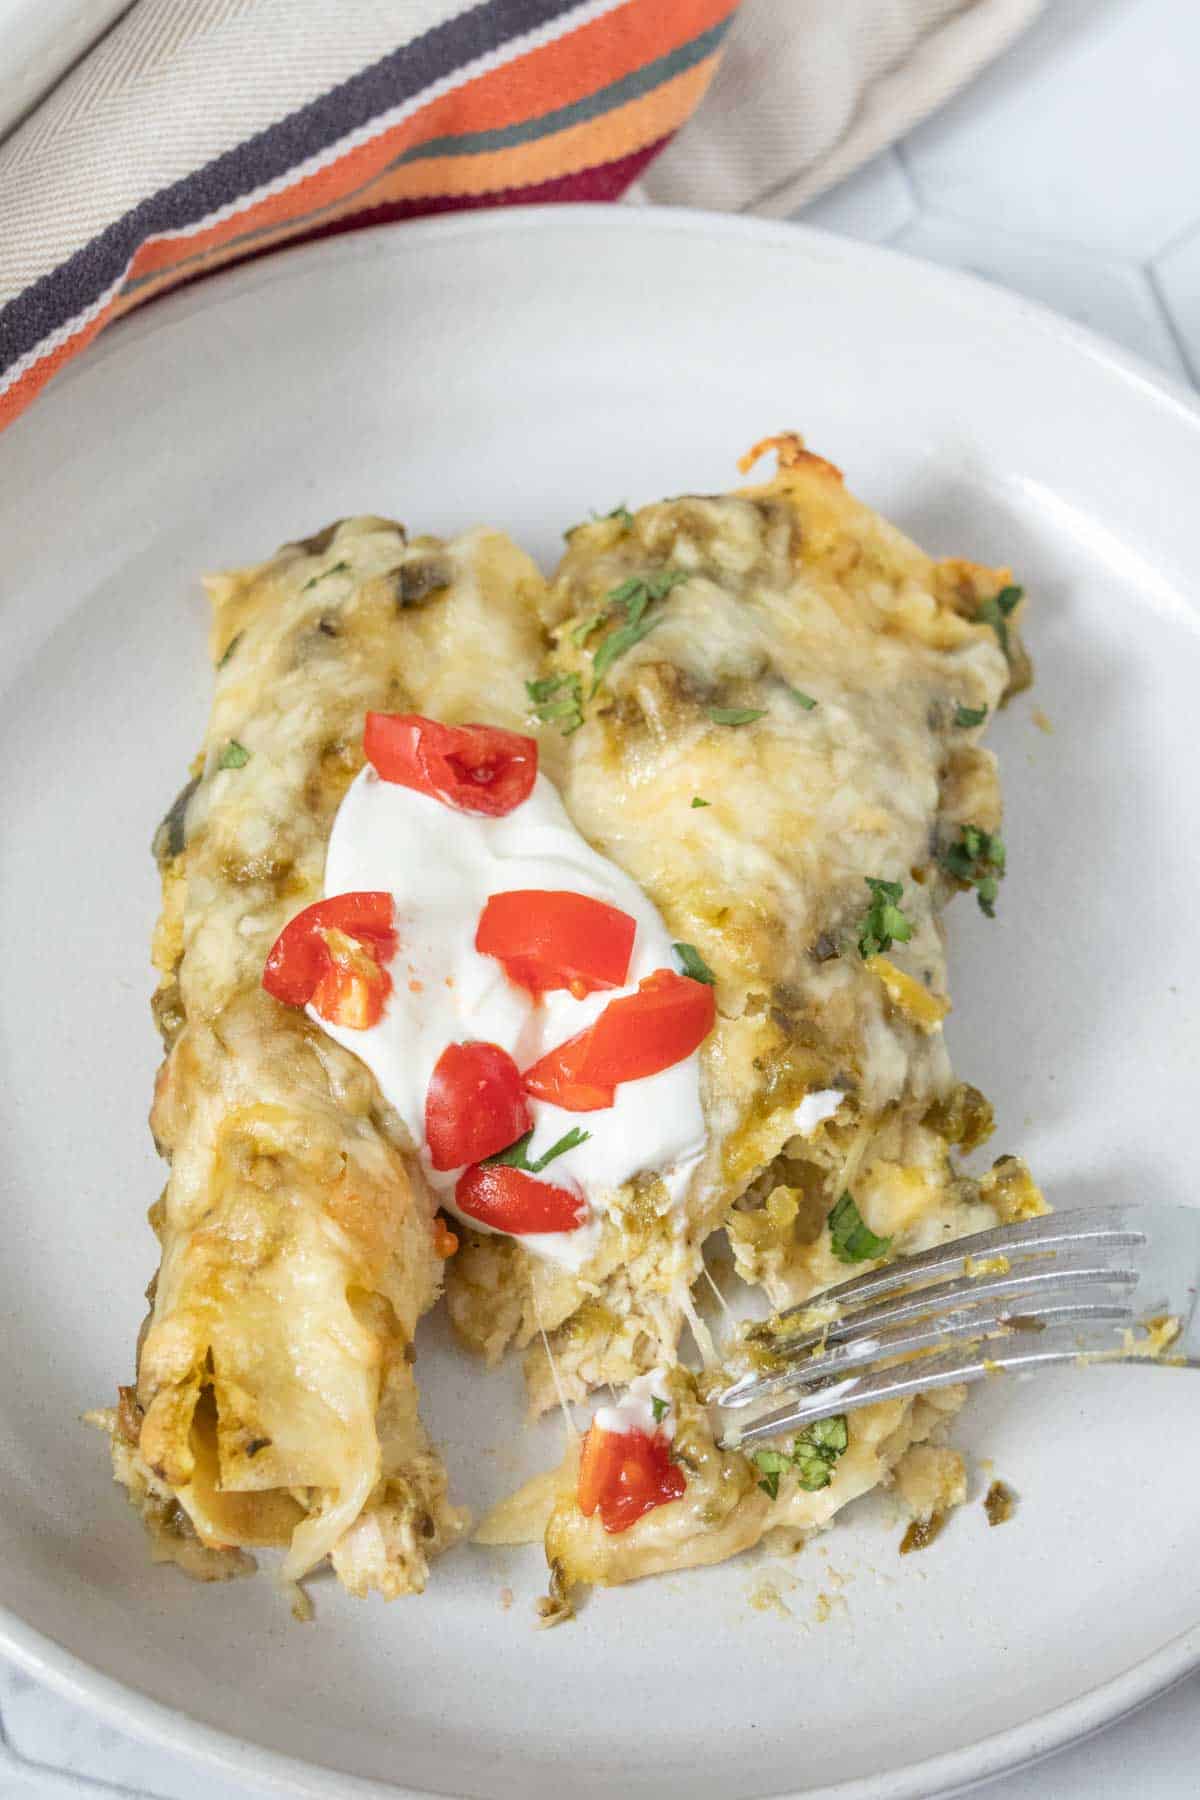 Enchiladas on a plate with sour cream and tomatoes.